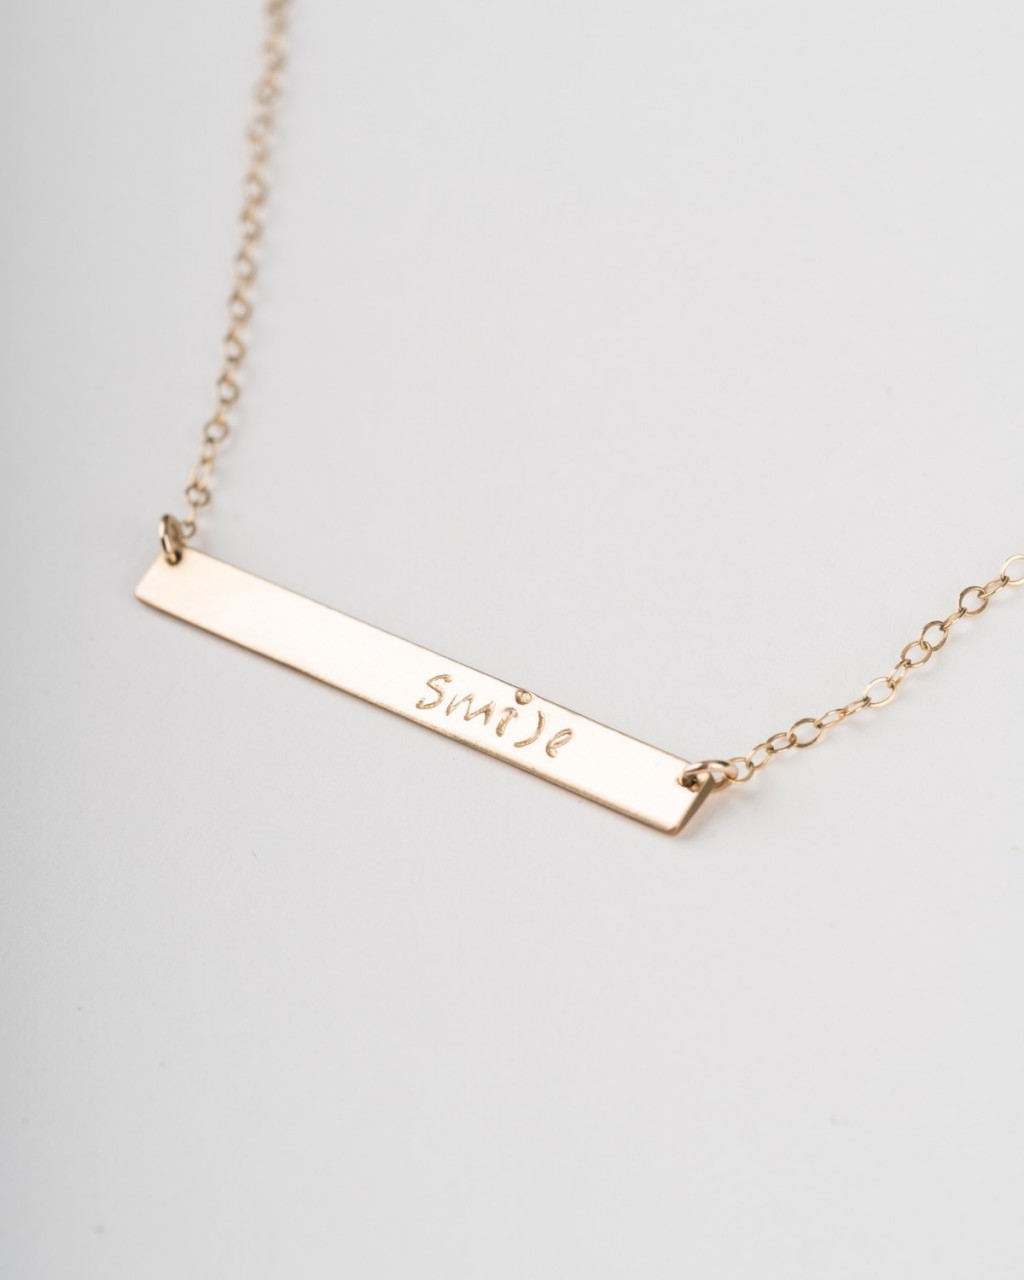 Personalized Necklaces for her - Custom Name Necklace